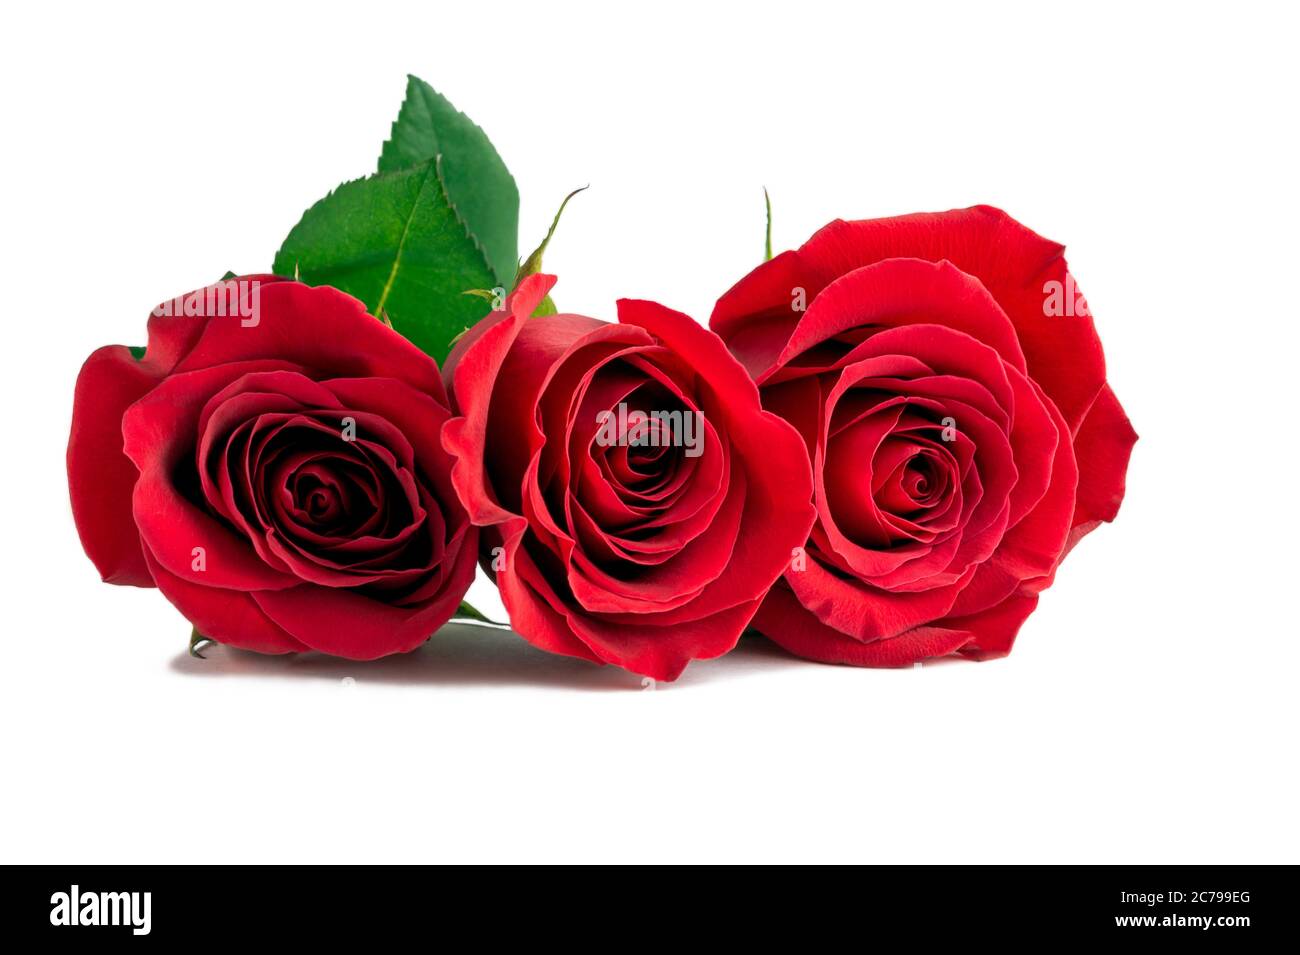 Three Red Rose Flowers Isolated On White Background Stock Photo Alamy